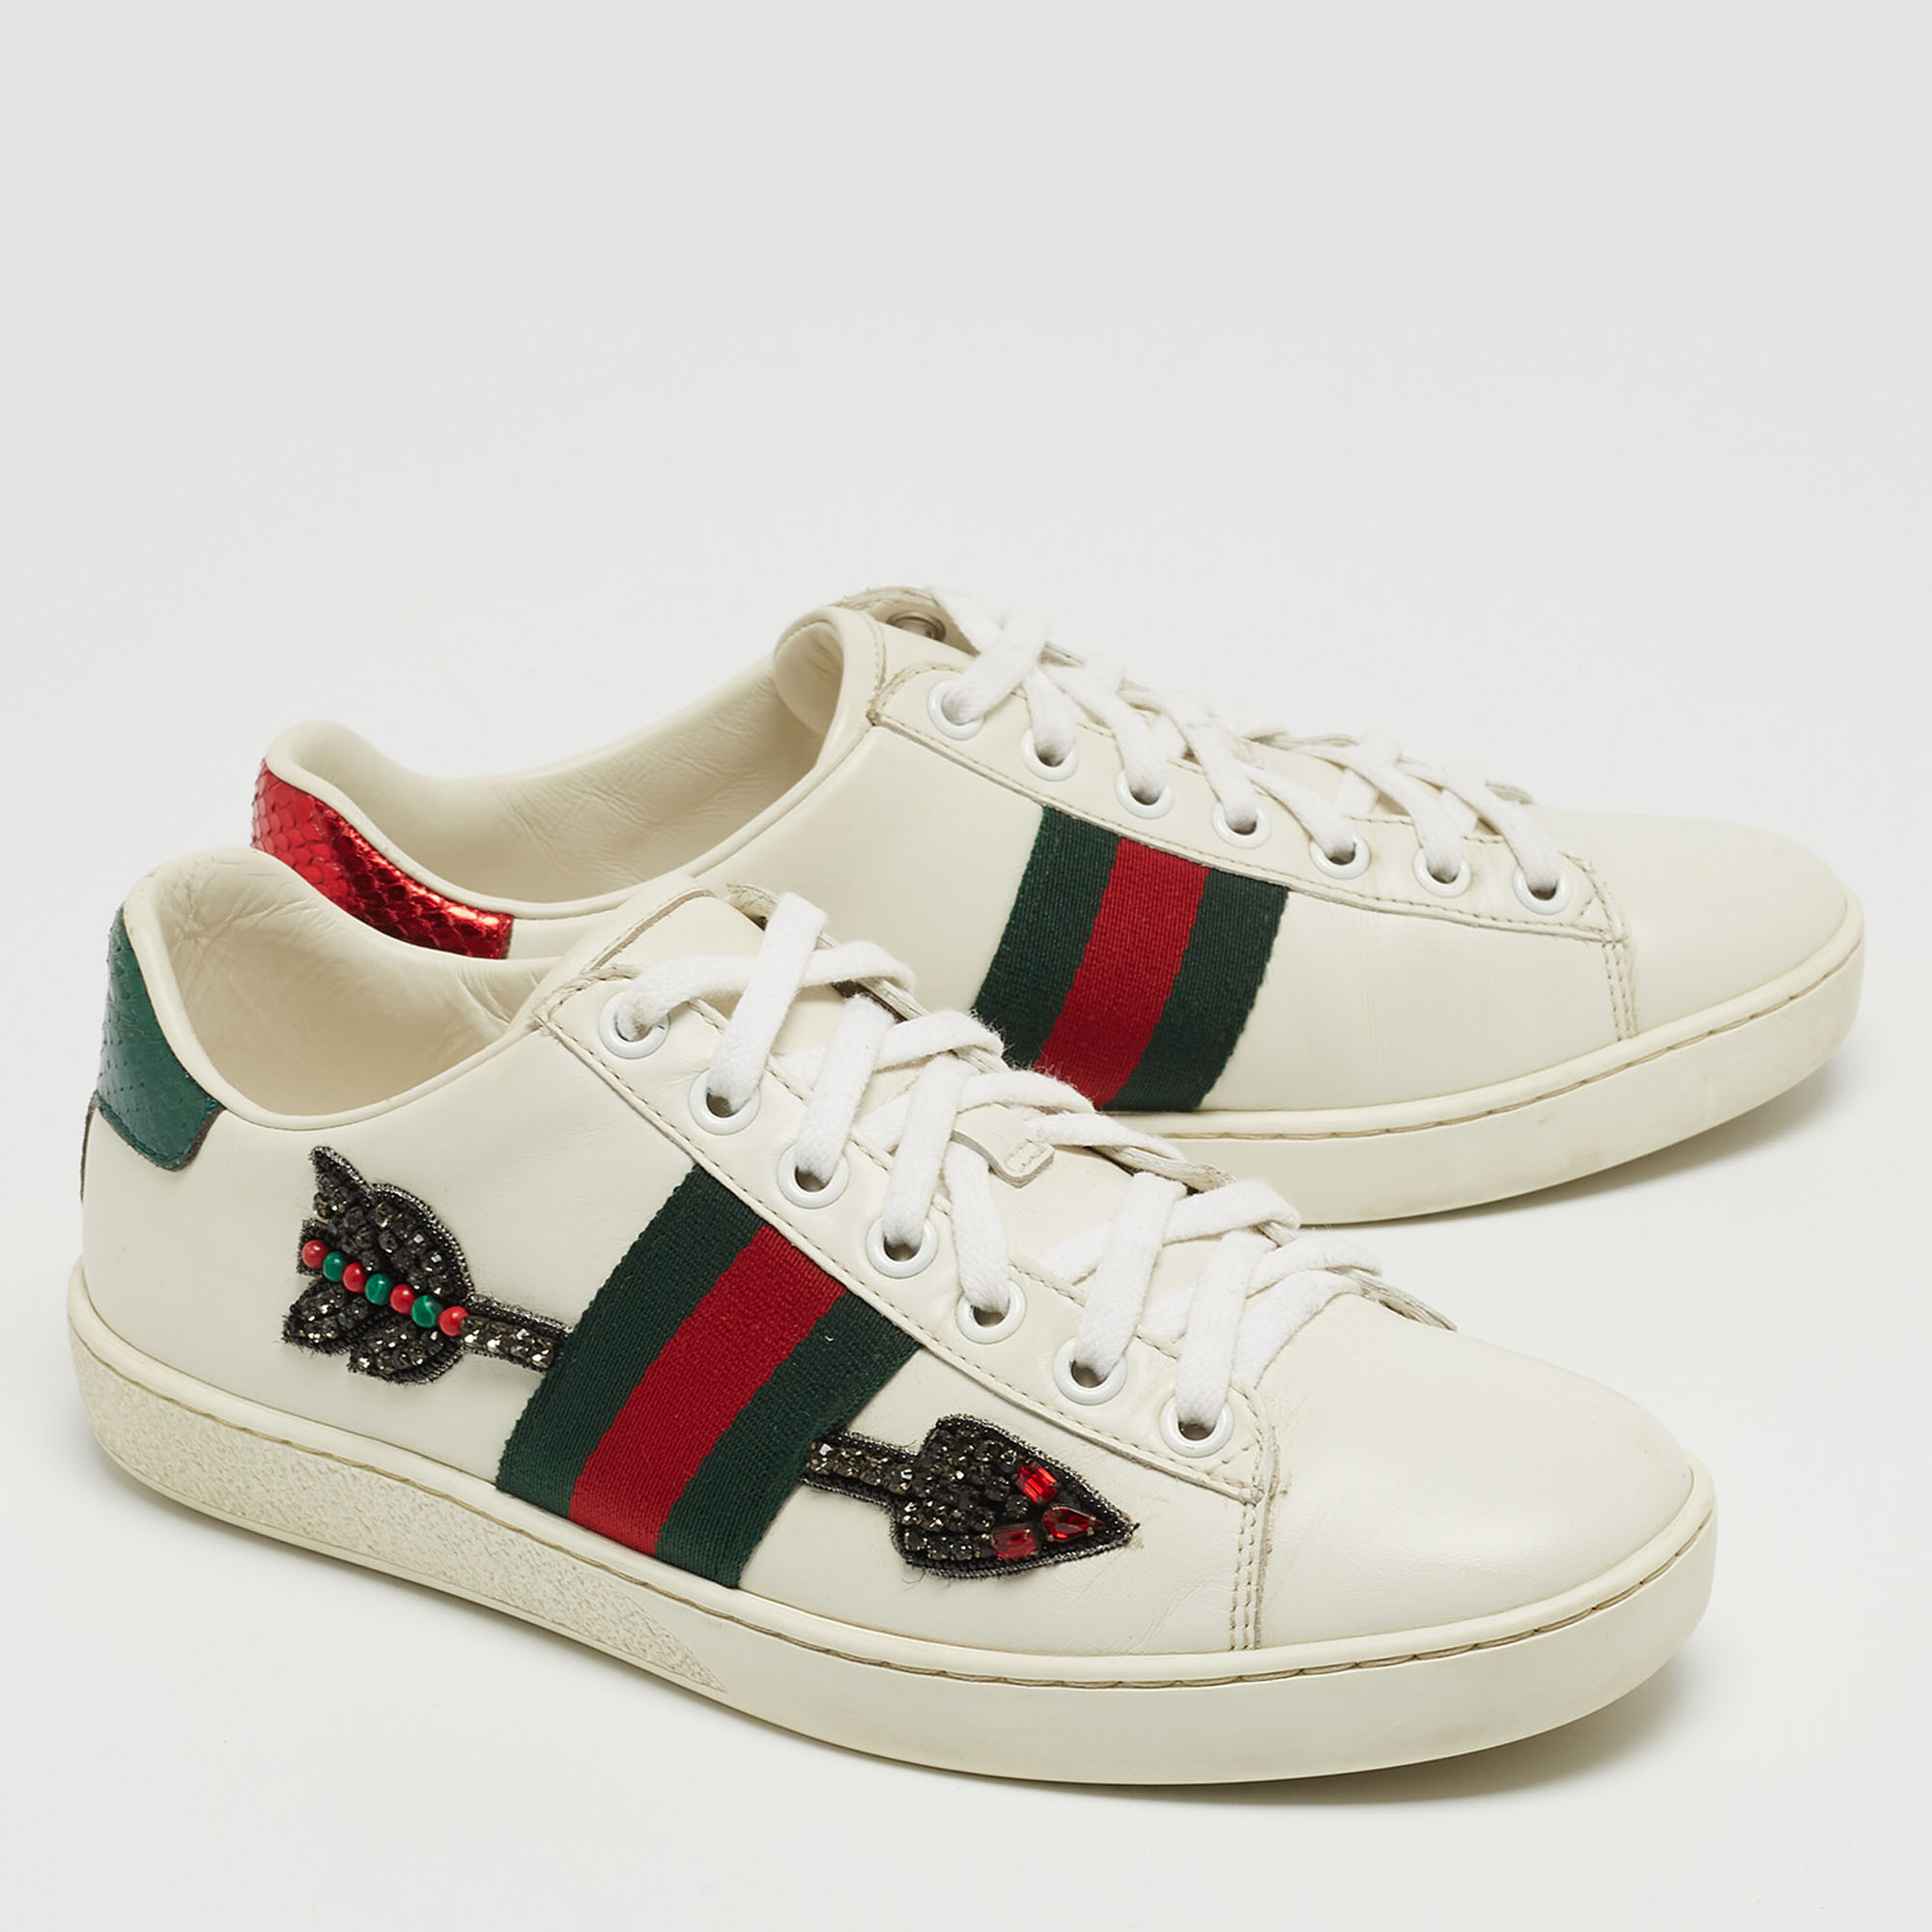 Gucci White Leather Embellished Ace Low Top Sneakers Size 36